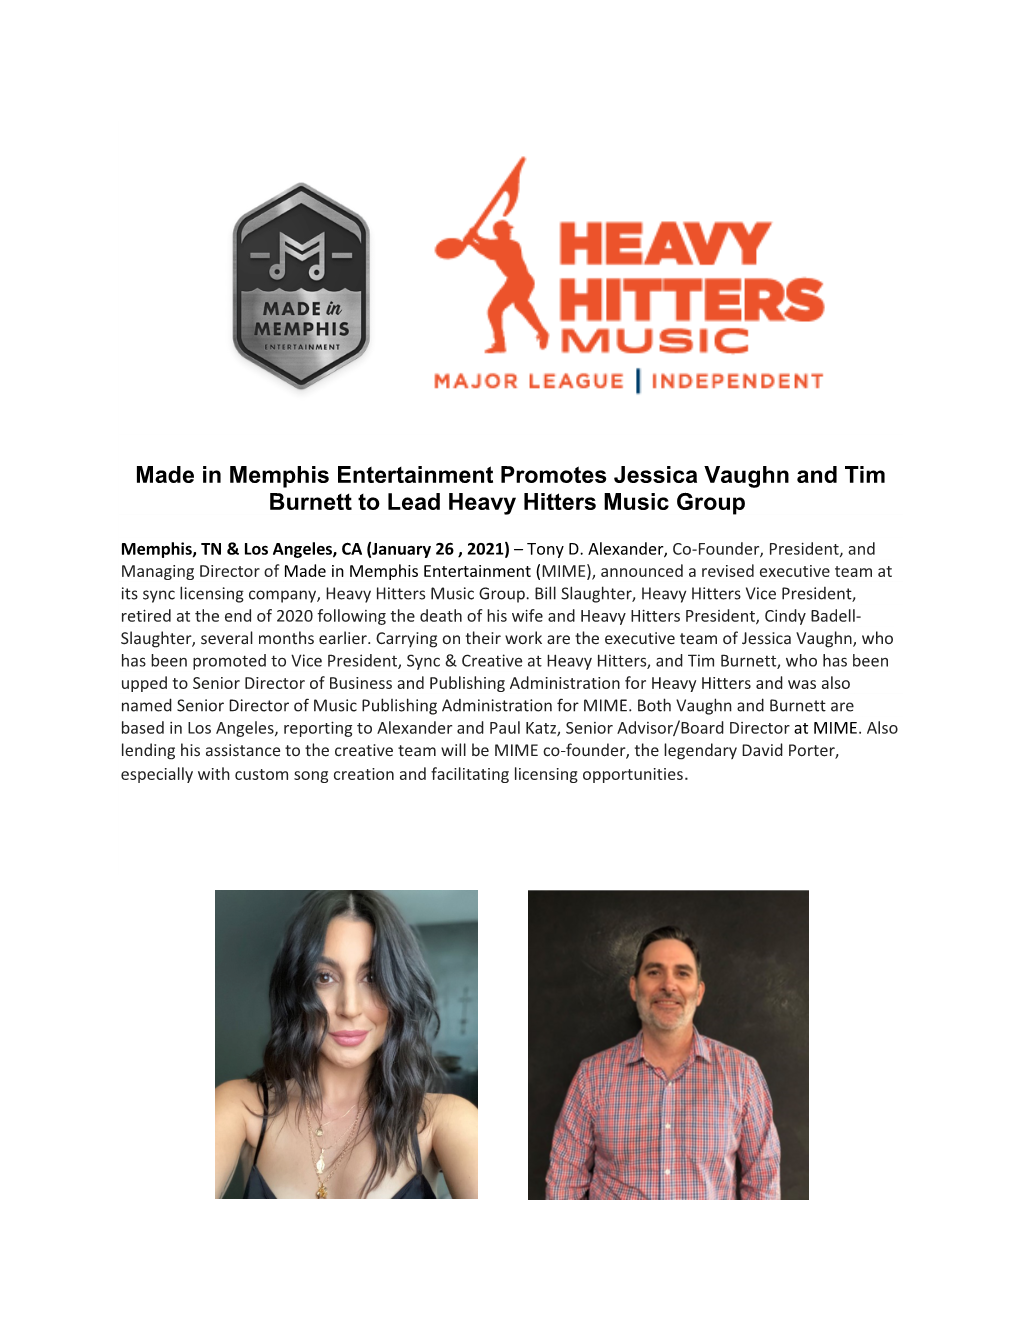 Made in Memphis Entertainment Promotes Jessica Vaughn and Tim Burnett to Lead Heavy Hitters Music Group